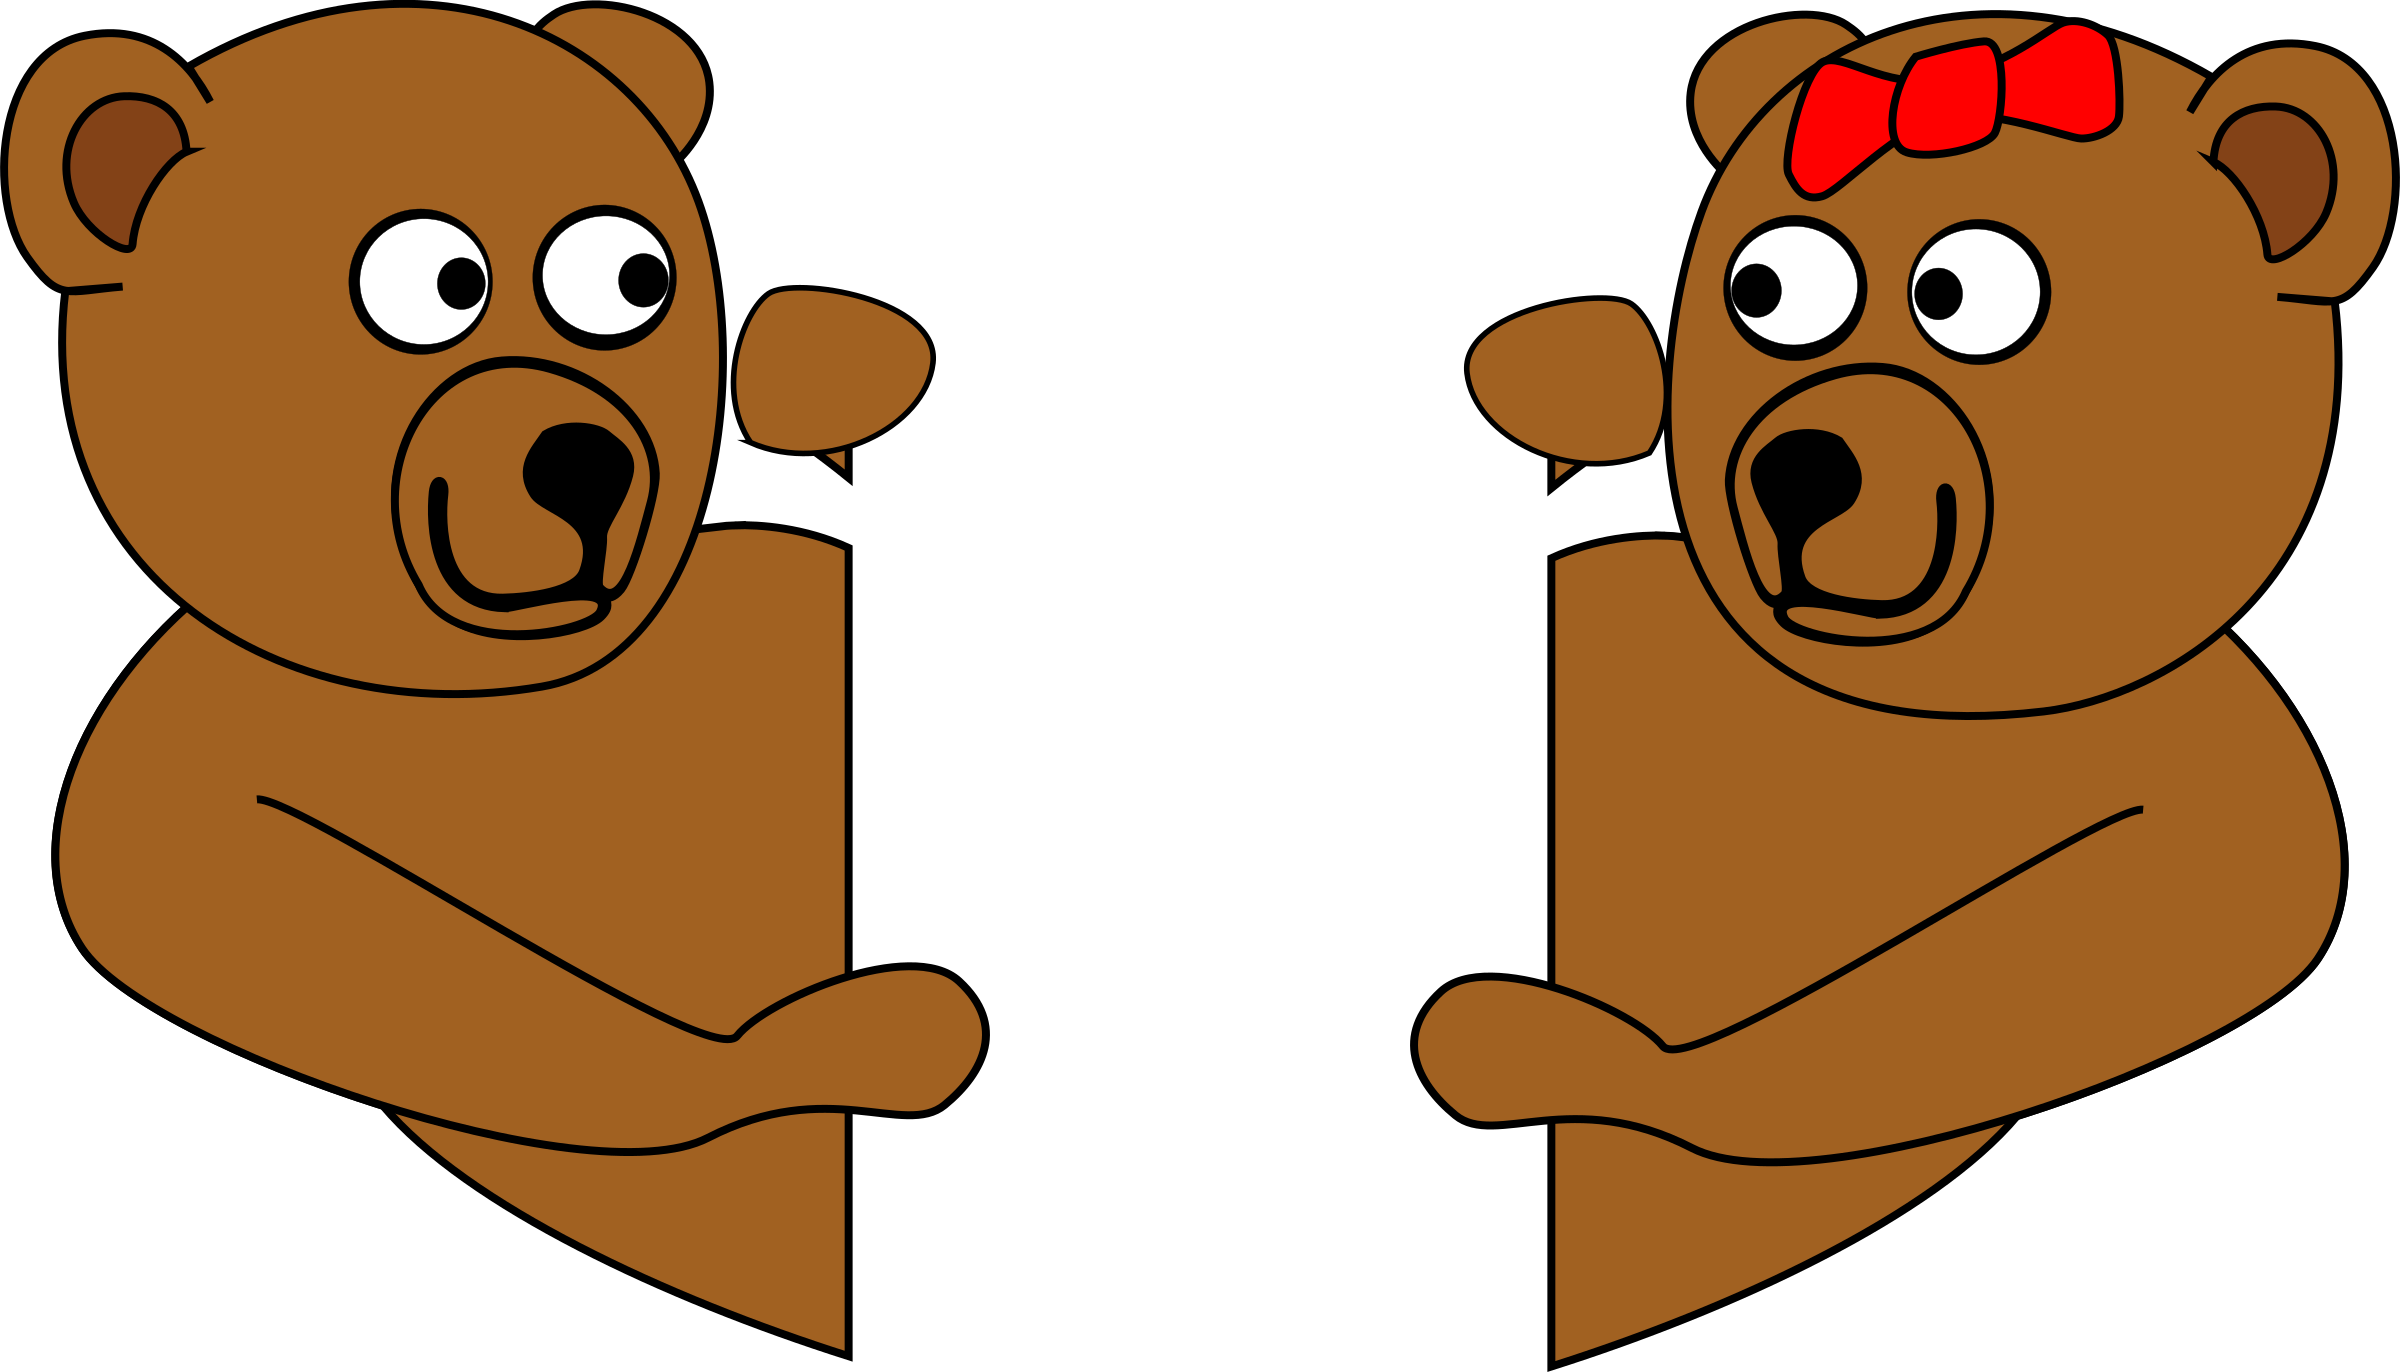 Helping clipart others clipart. V day teddy bears